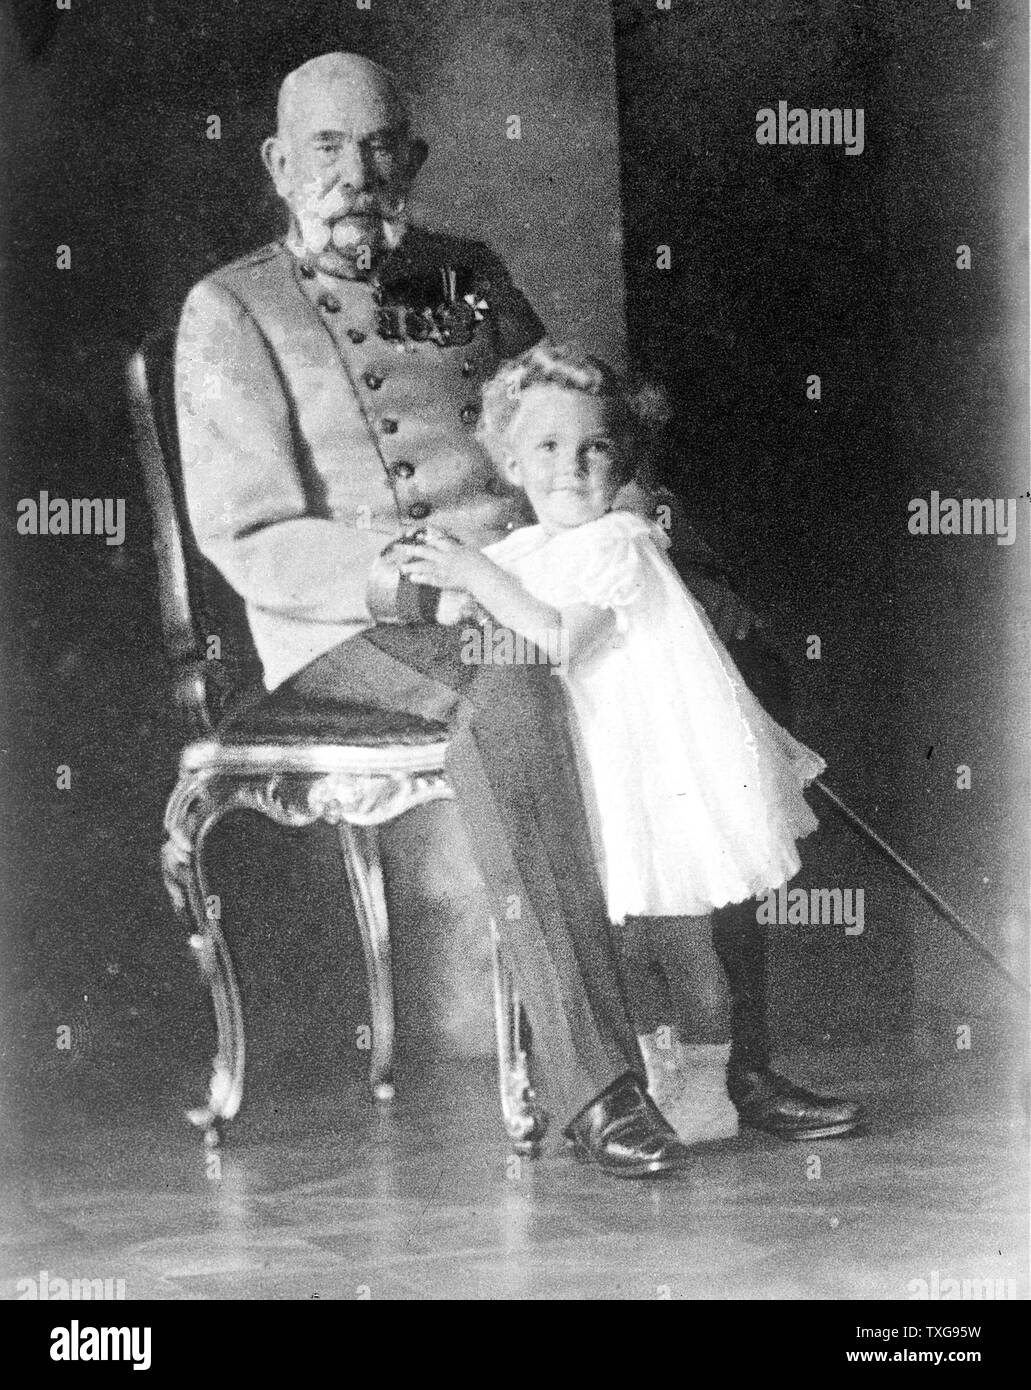 Franz Joseph I, Emperor of Austria and King of Hungary 1848-1916, with his great-great-nephew Otto von Habsburg Stock Photo